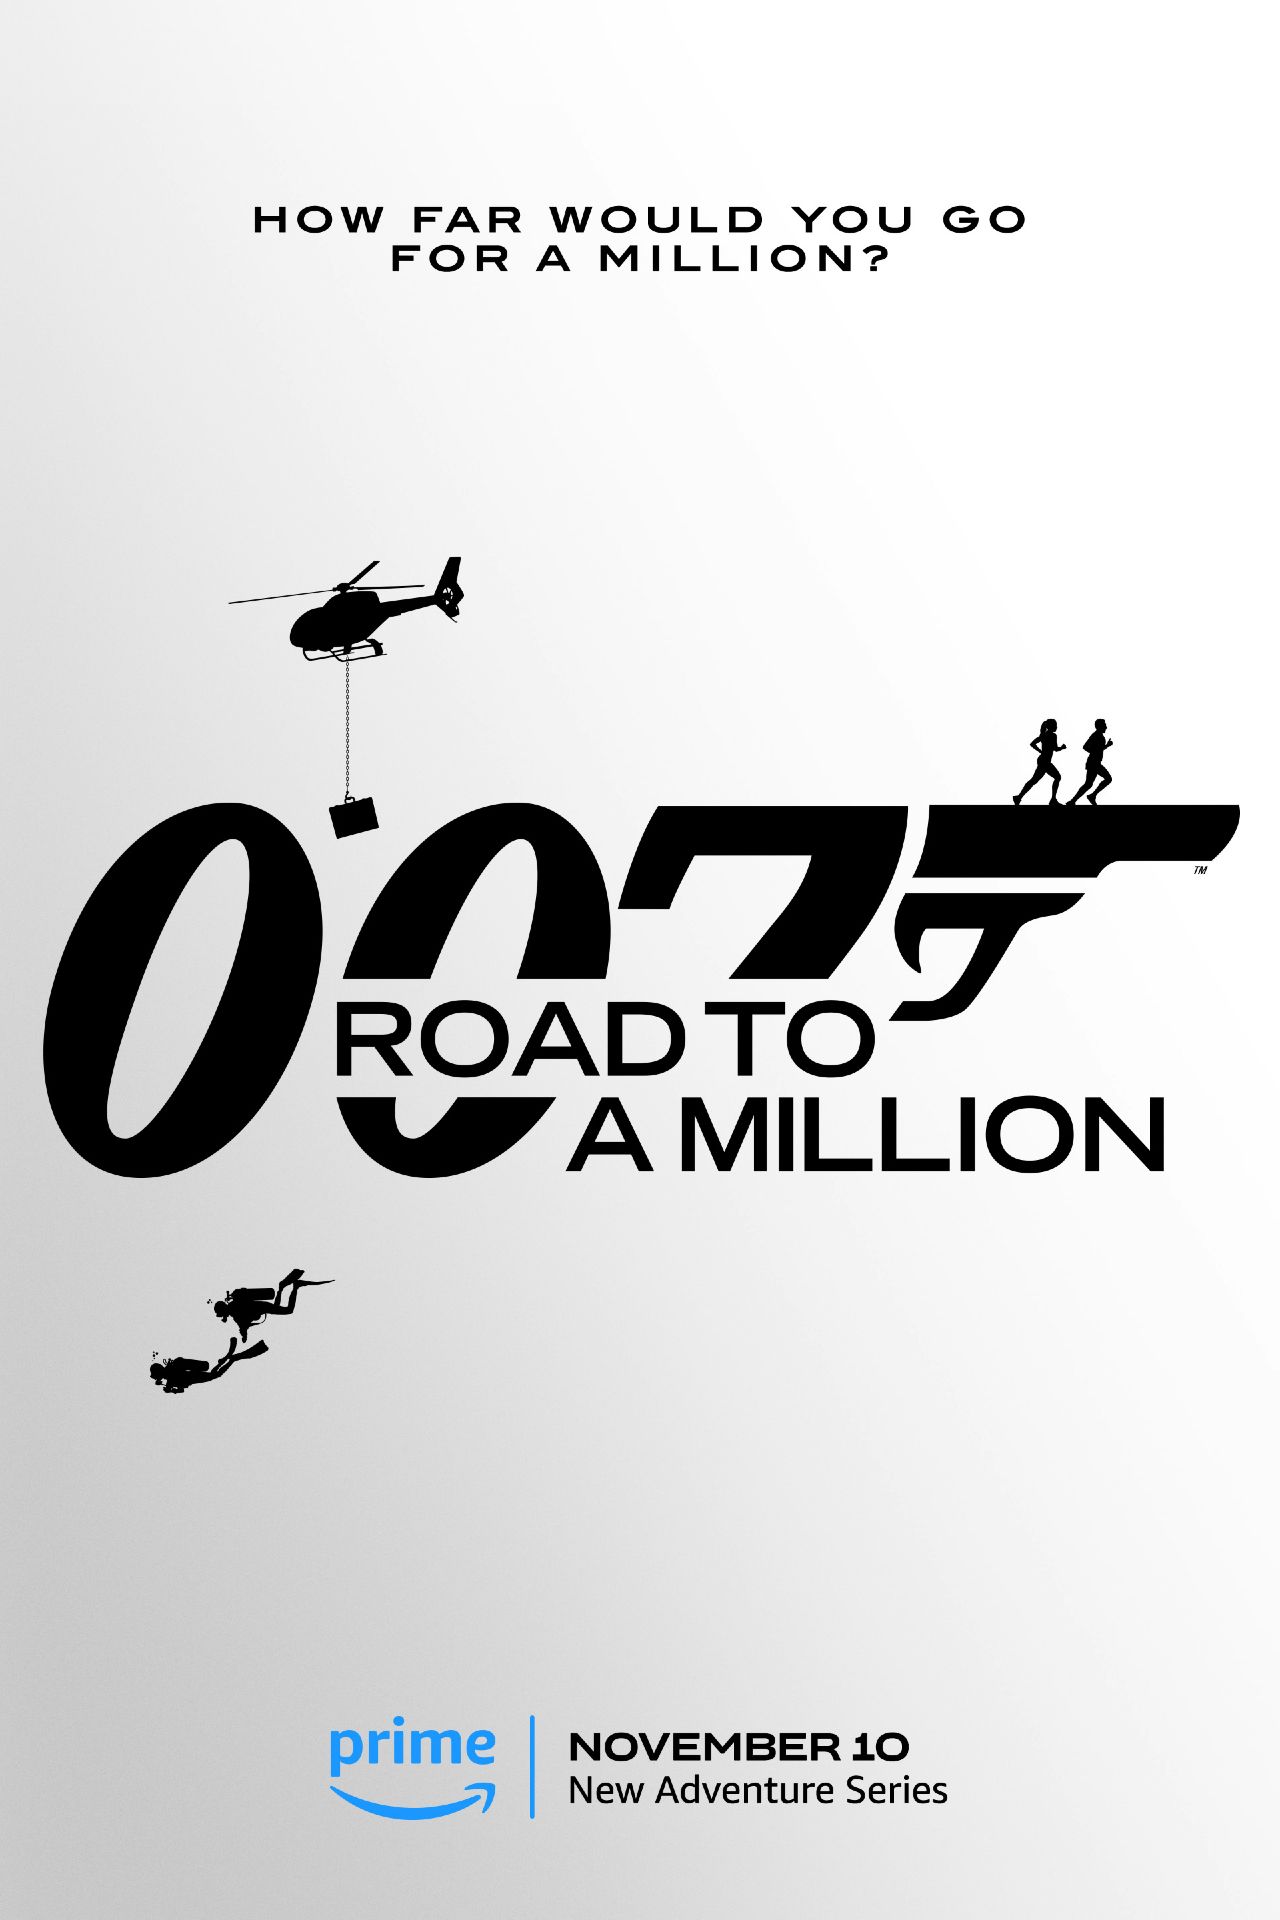 007 Road to a Million TV Series Poster